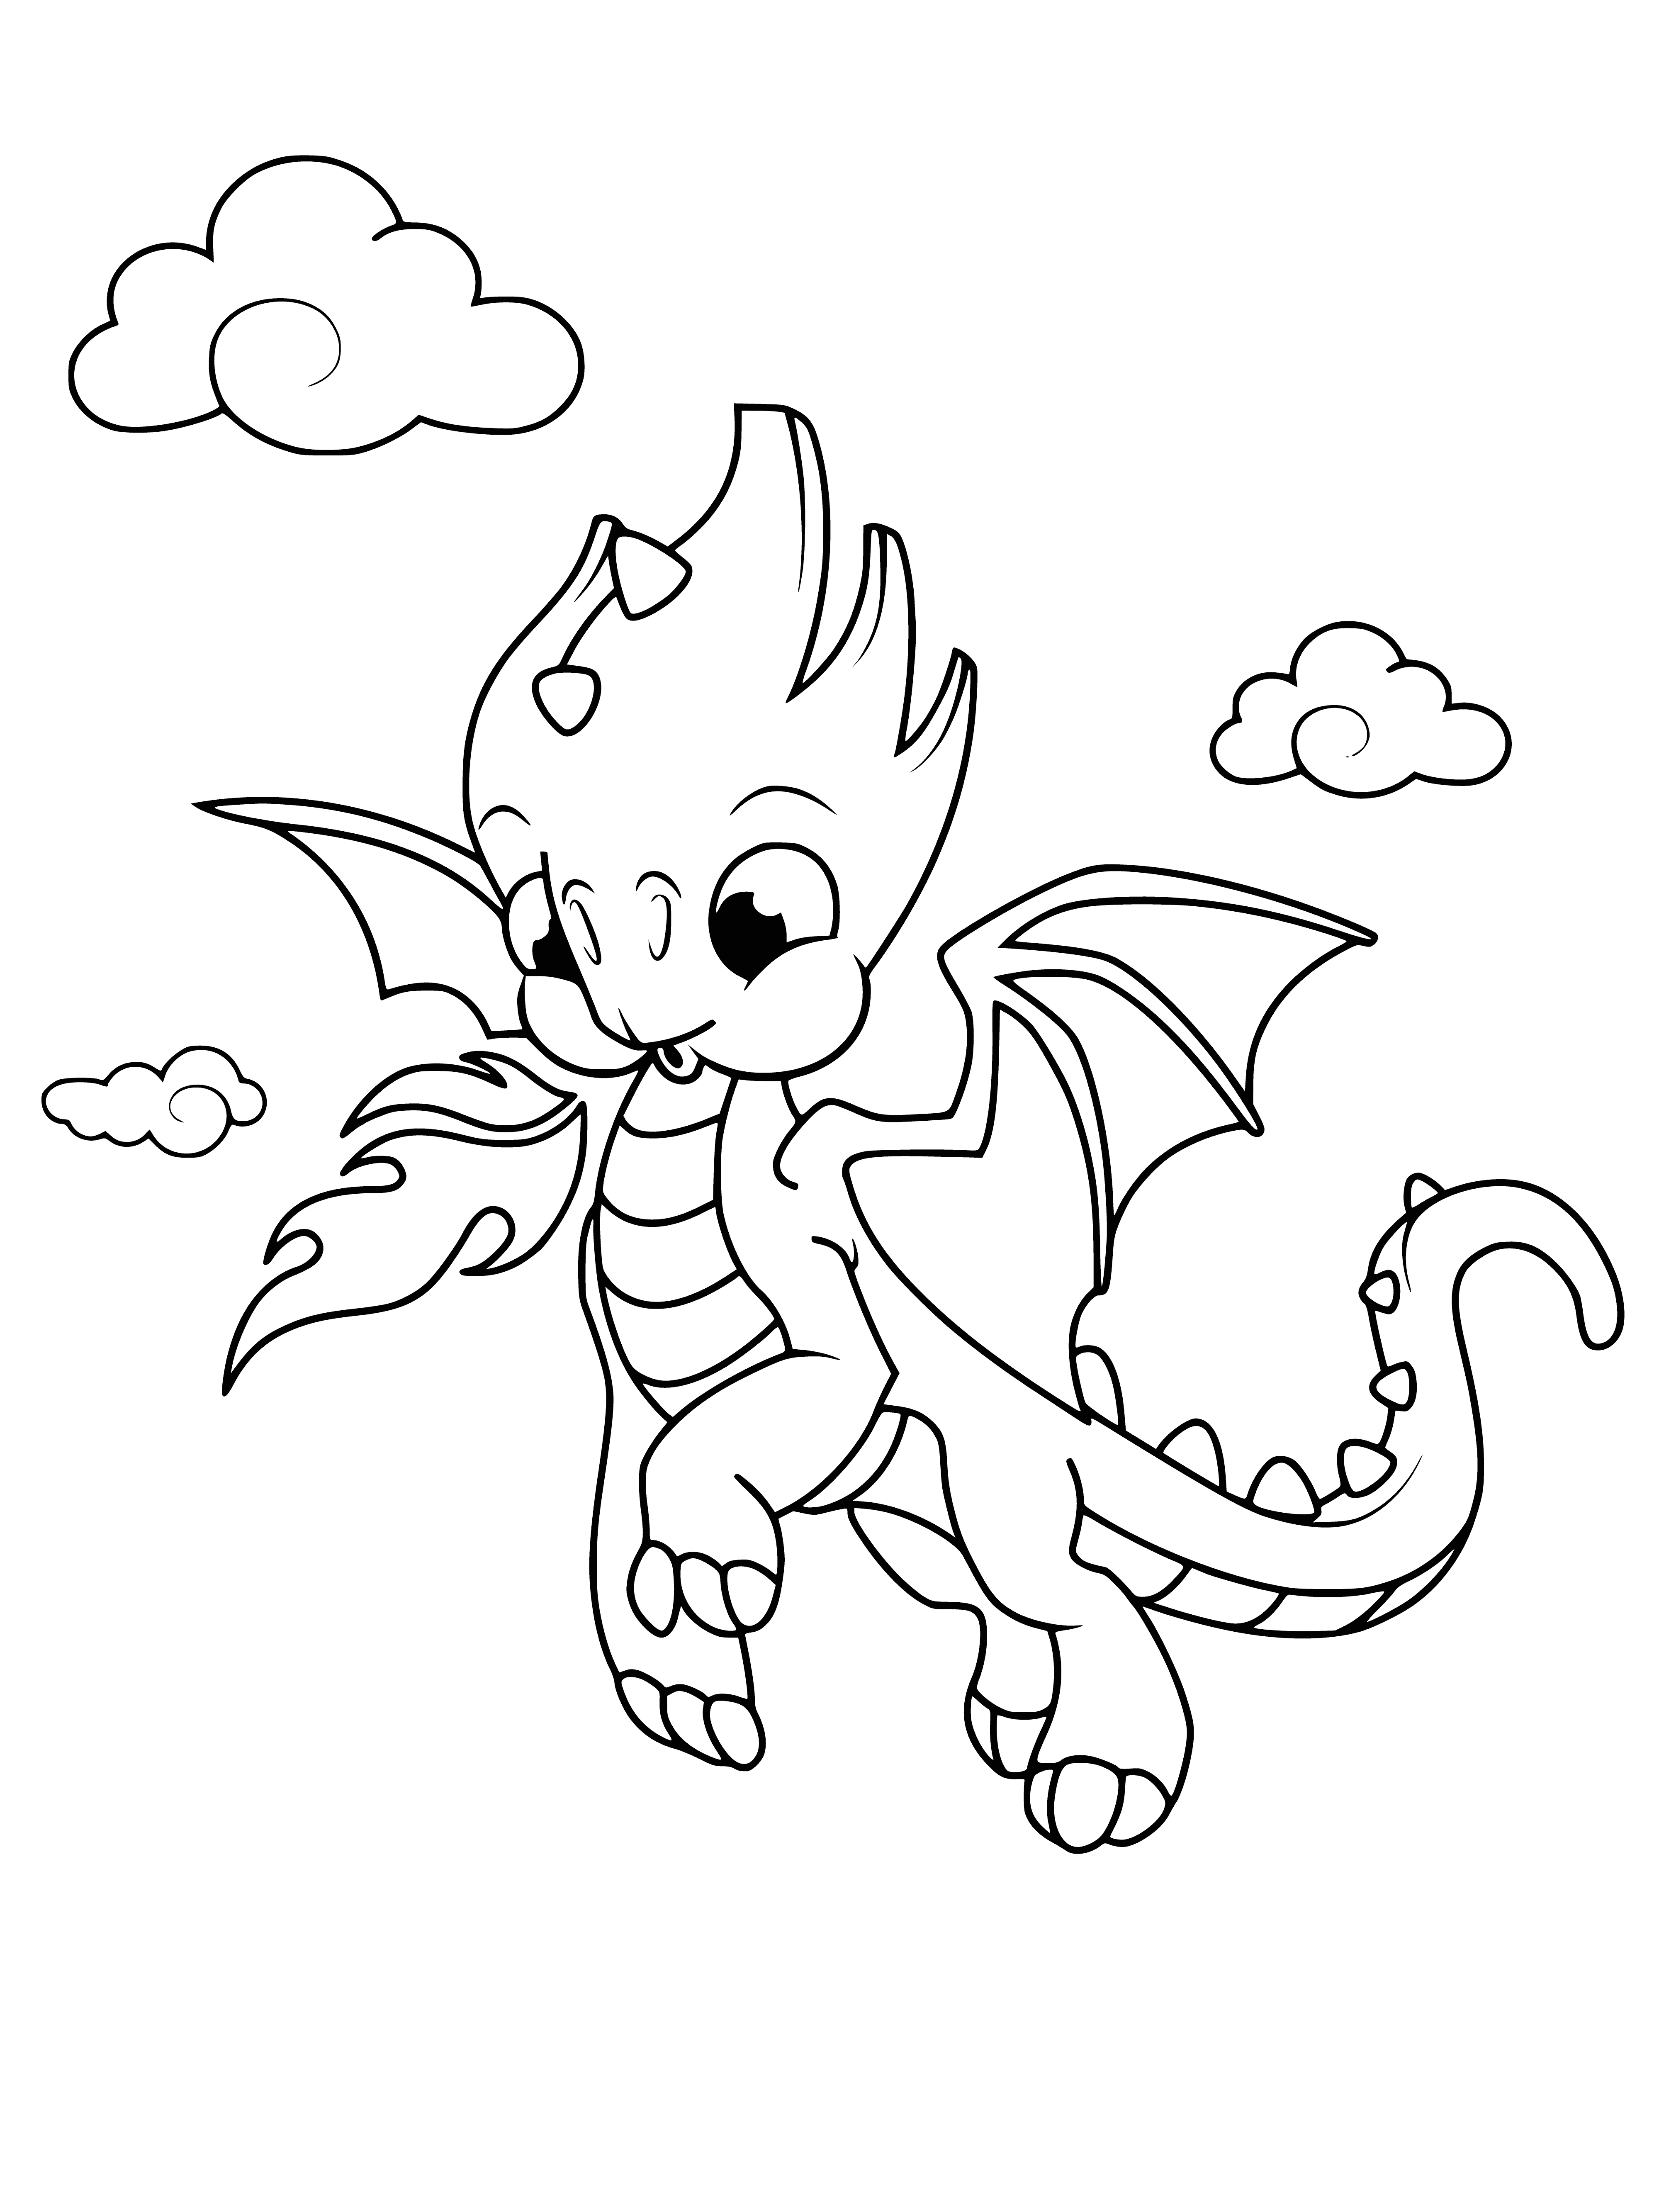 coloring page: Dragon standing on a rock, looking up at the sky with spread wings & long tail; a perfect coloring page! #coloringbook #dragon